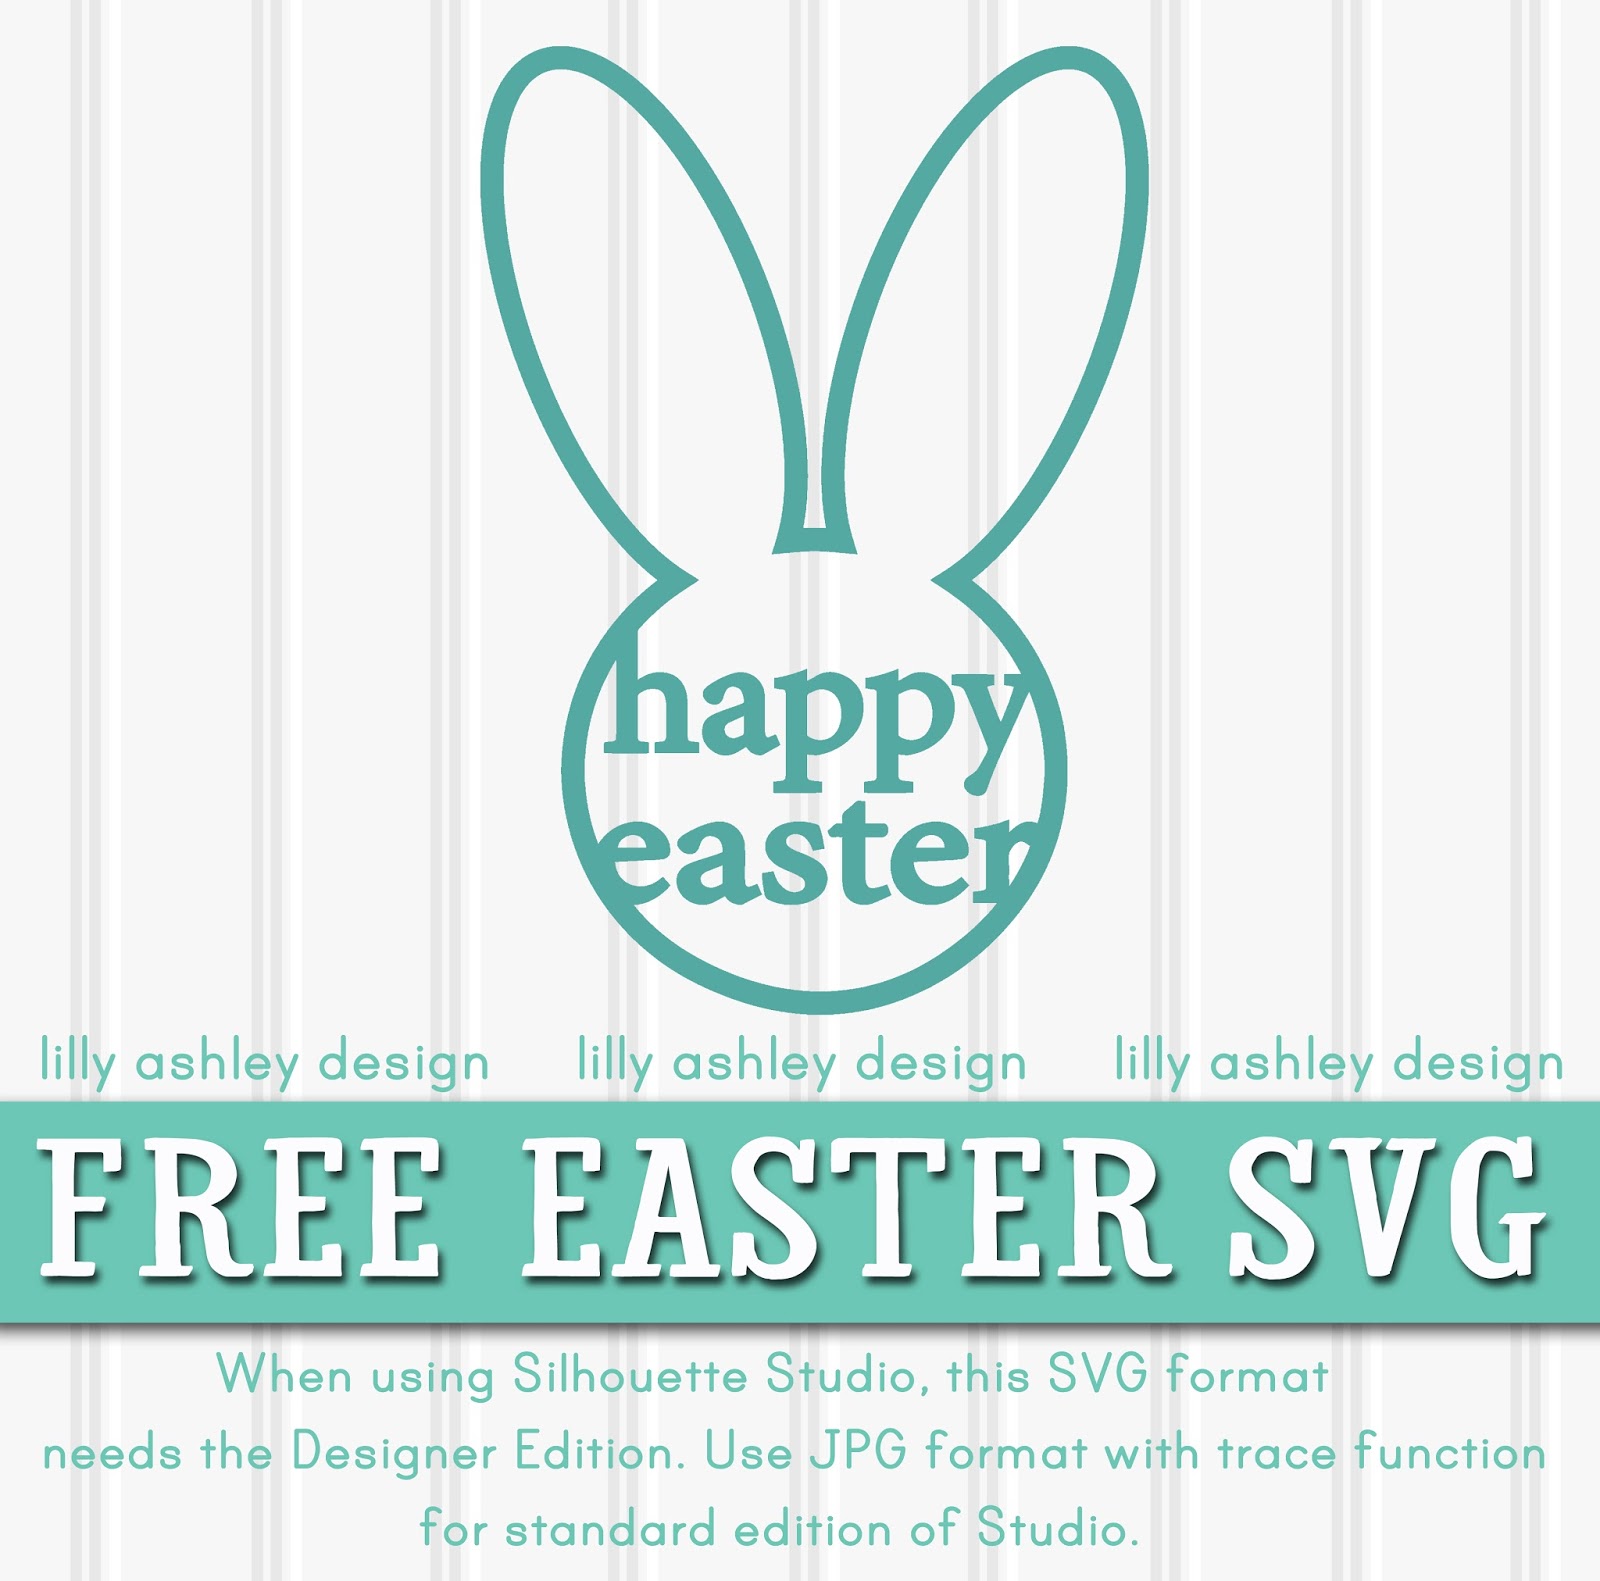 Download Make it Create by LillyAshley...Freebie Downloads: Free Easter SVG Cut File